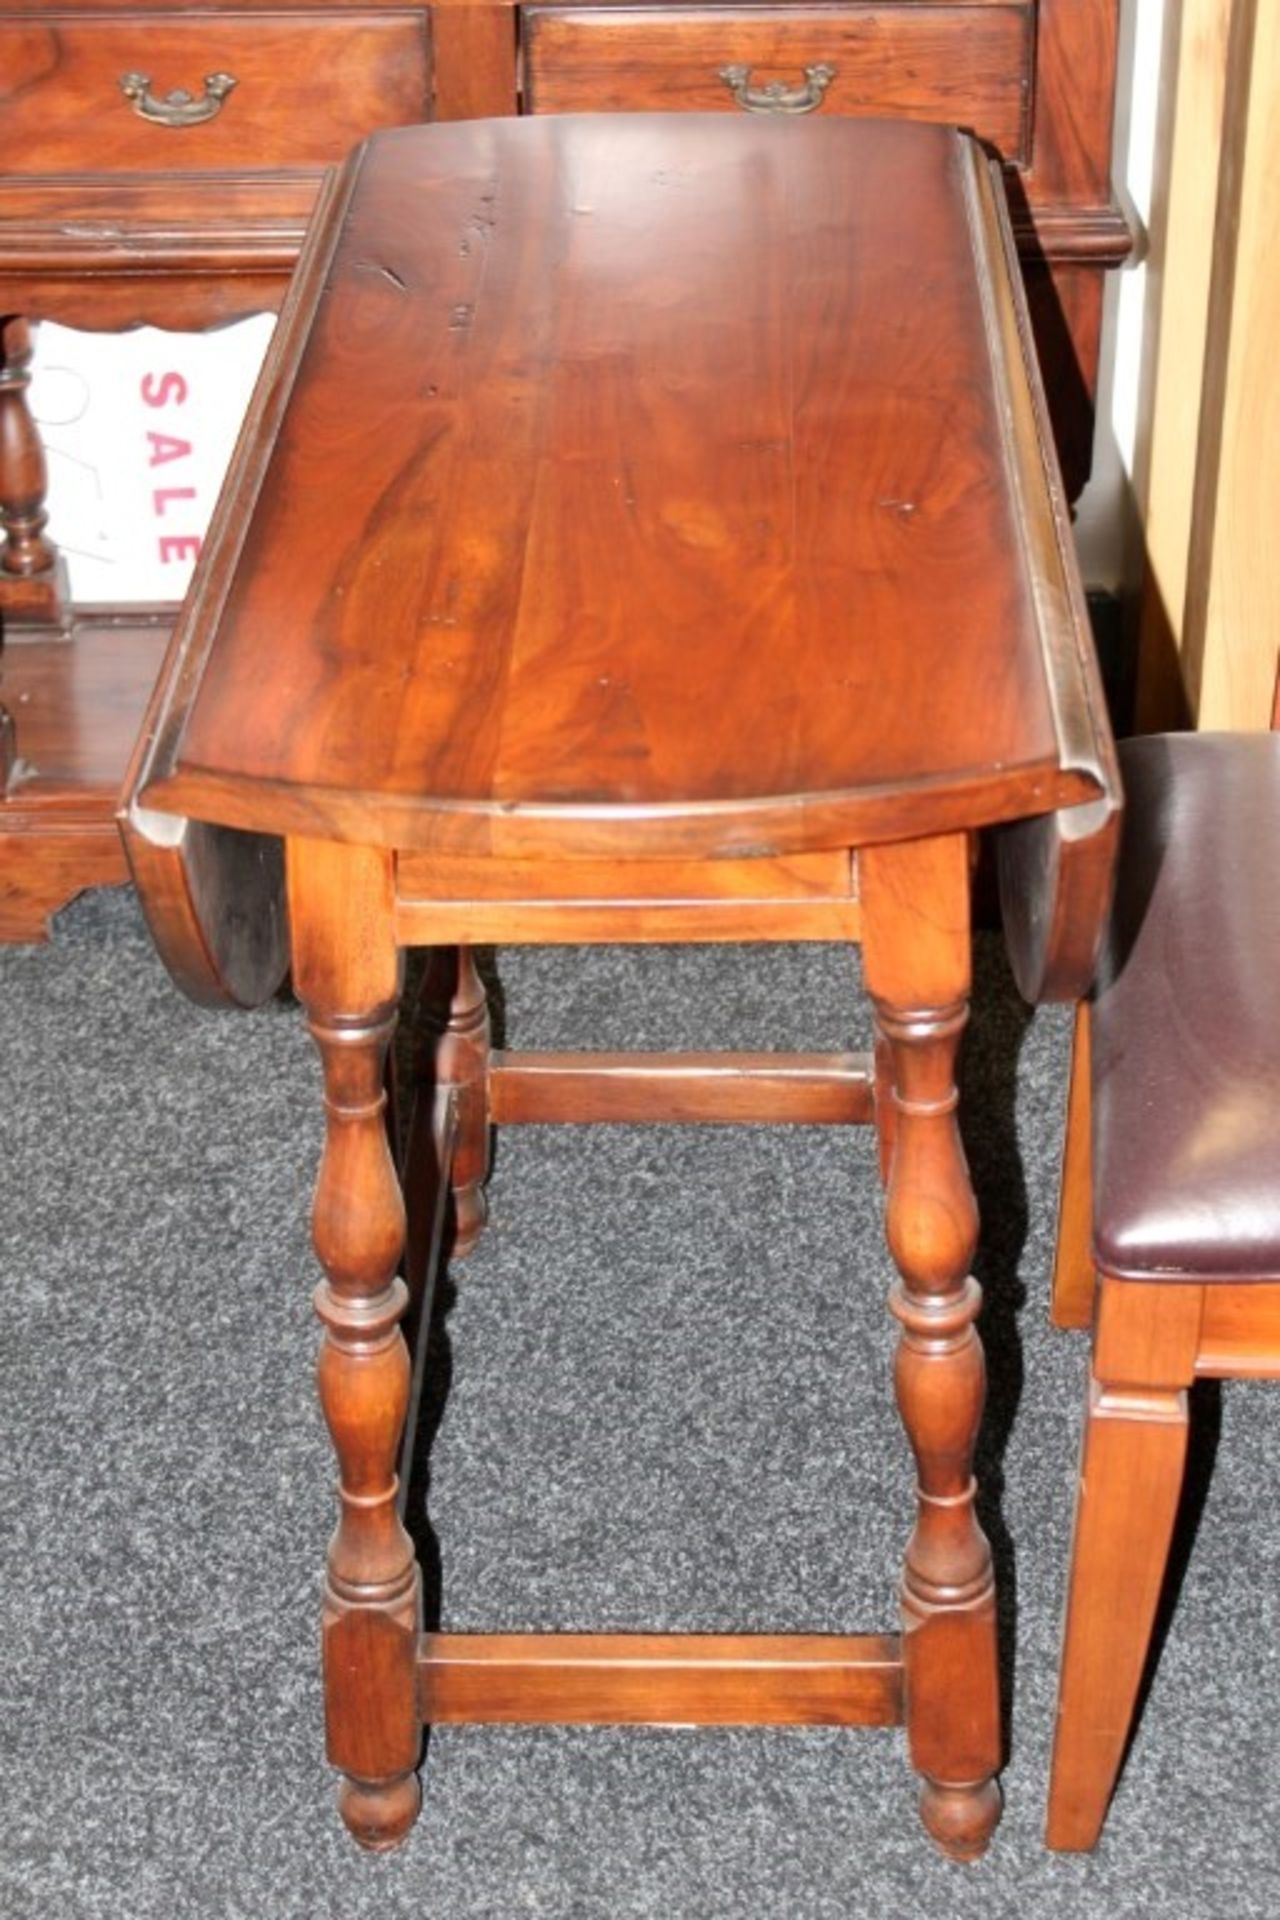 1 x Mark Webster "Burlington" Solid Wood Gate Leg Extending Table With 2-Drawers + 2-Folds - Diamete - Image 12 of 14